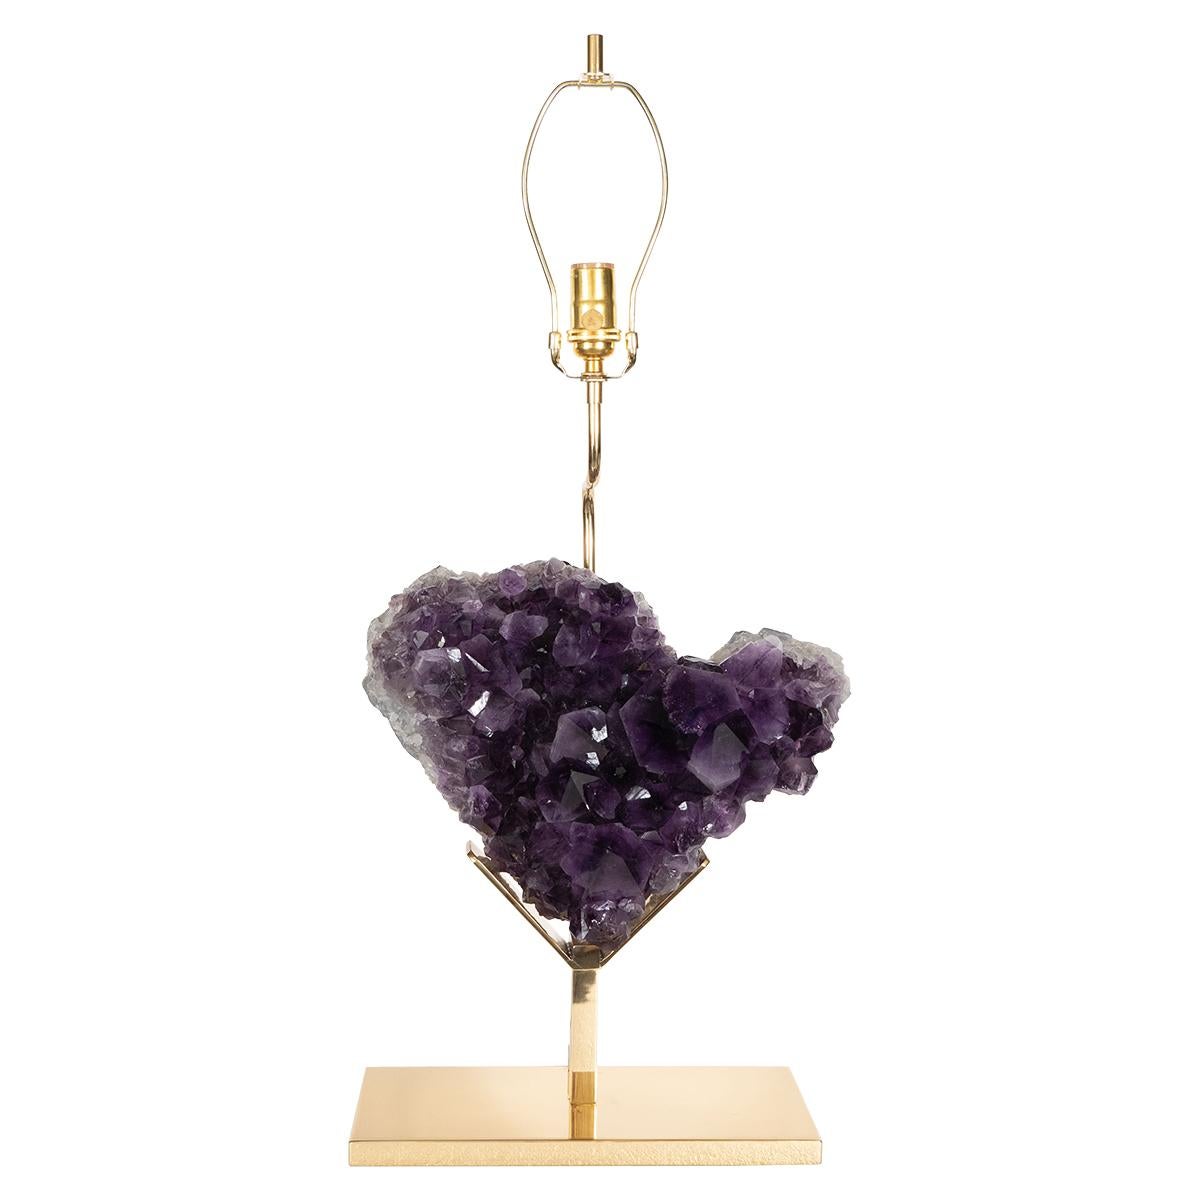 Single brass table lamp with custom frame supporting a massive heart-shaped natural amethyst fragment.